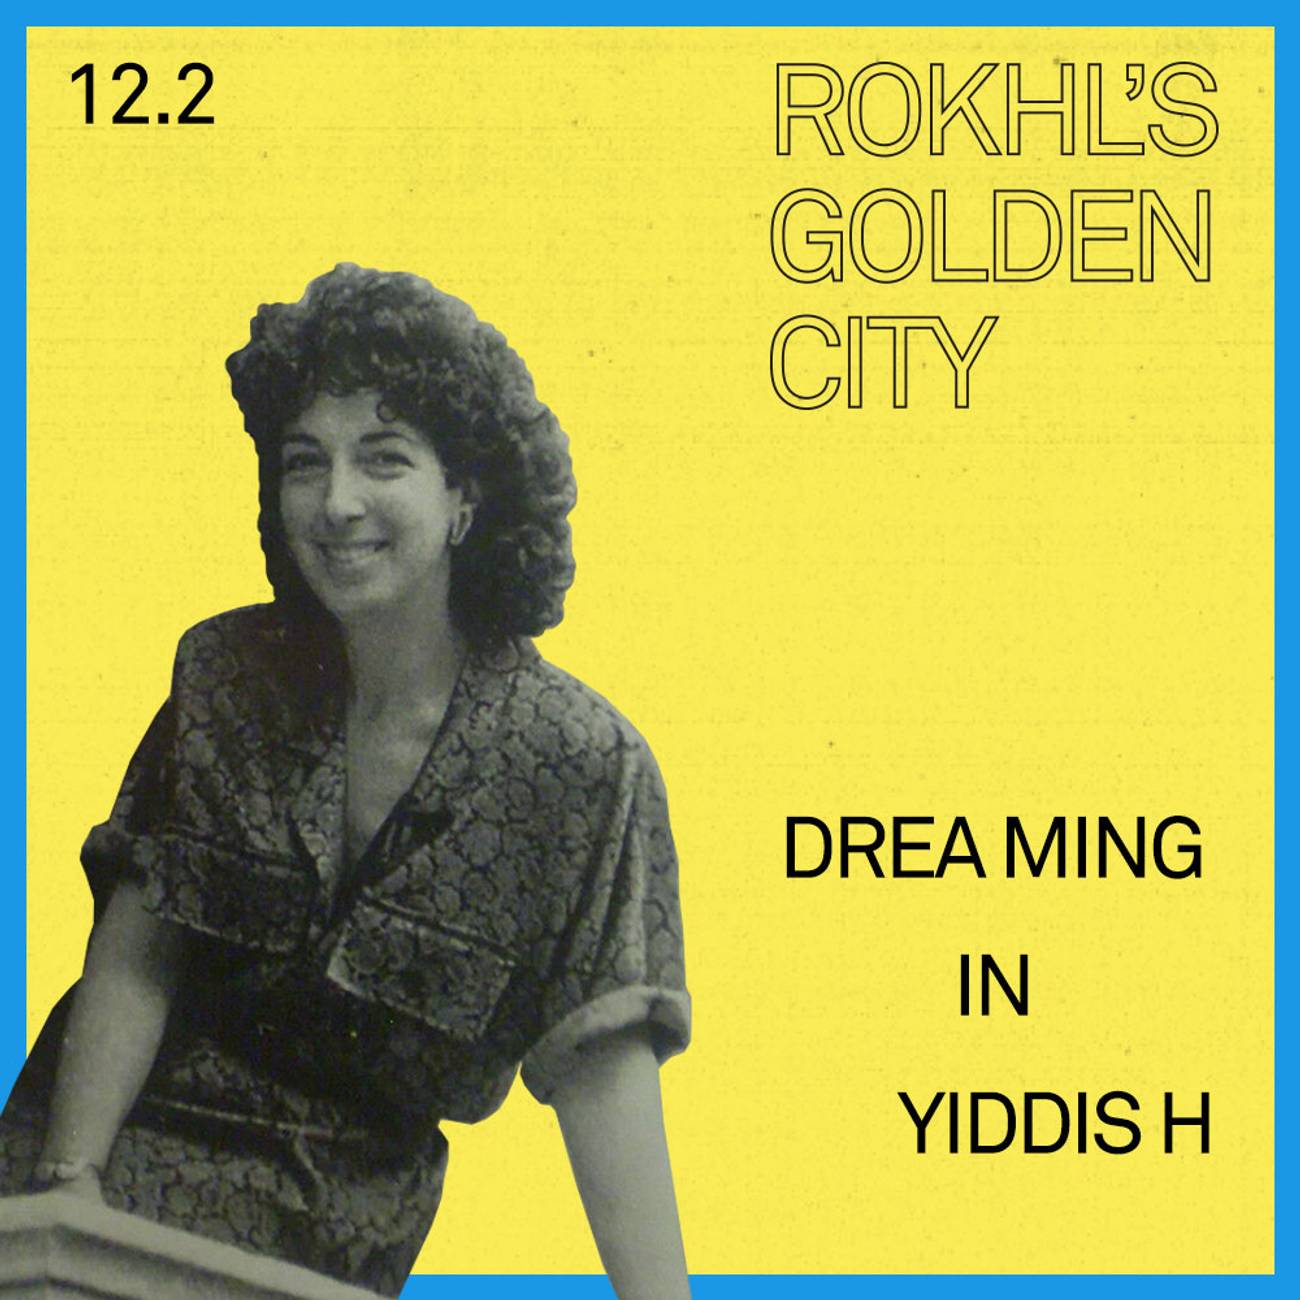 Inset image from the cover of Adrienne Cooper's record 'Dreaming in Yiddish'